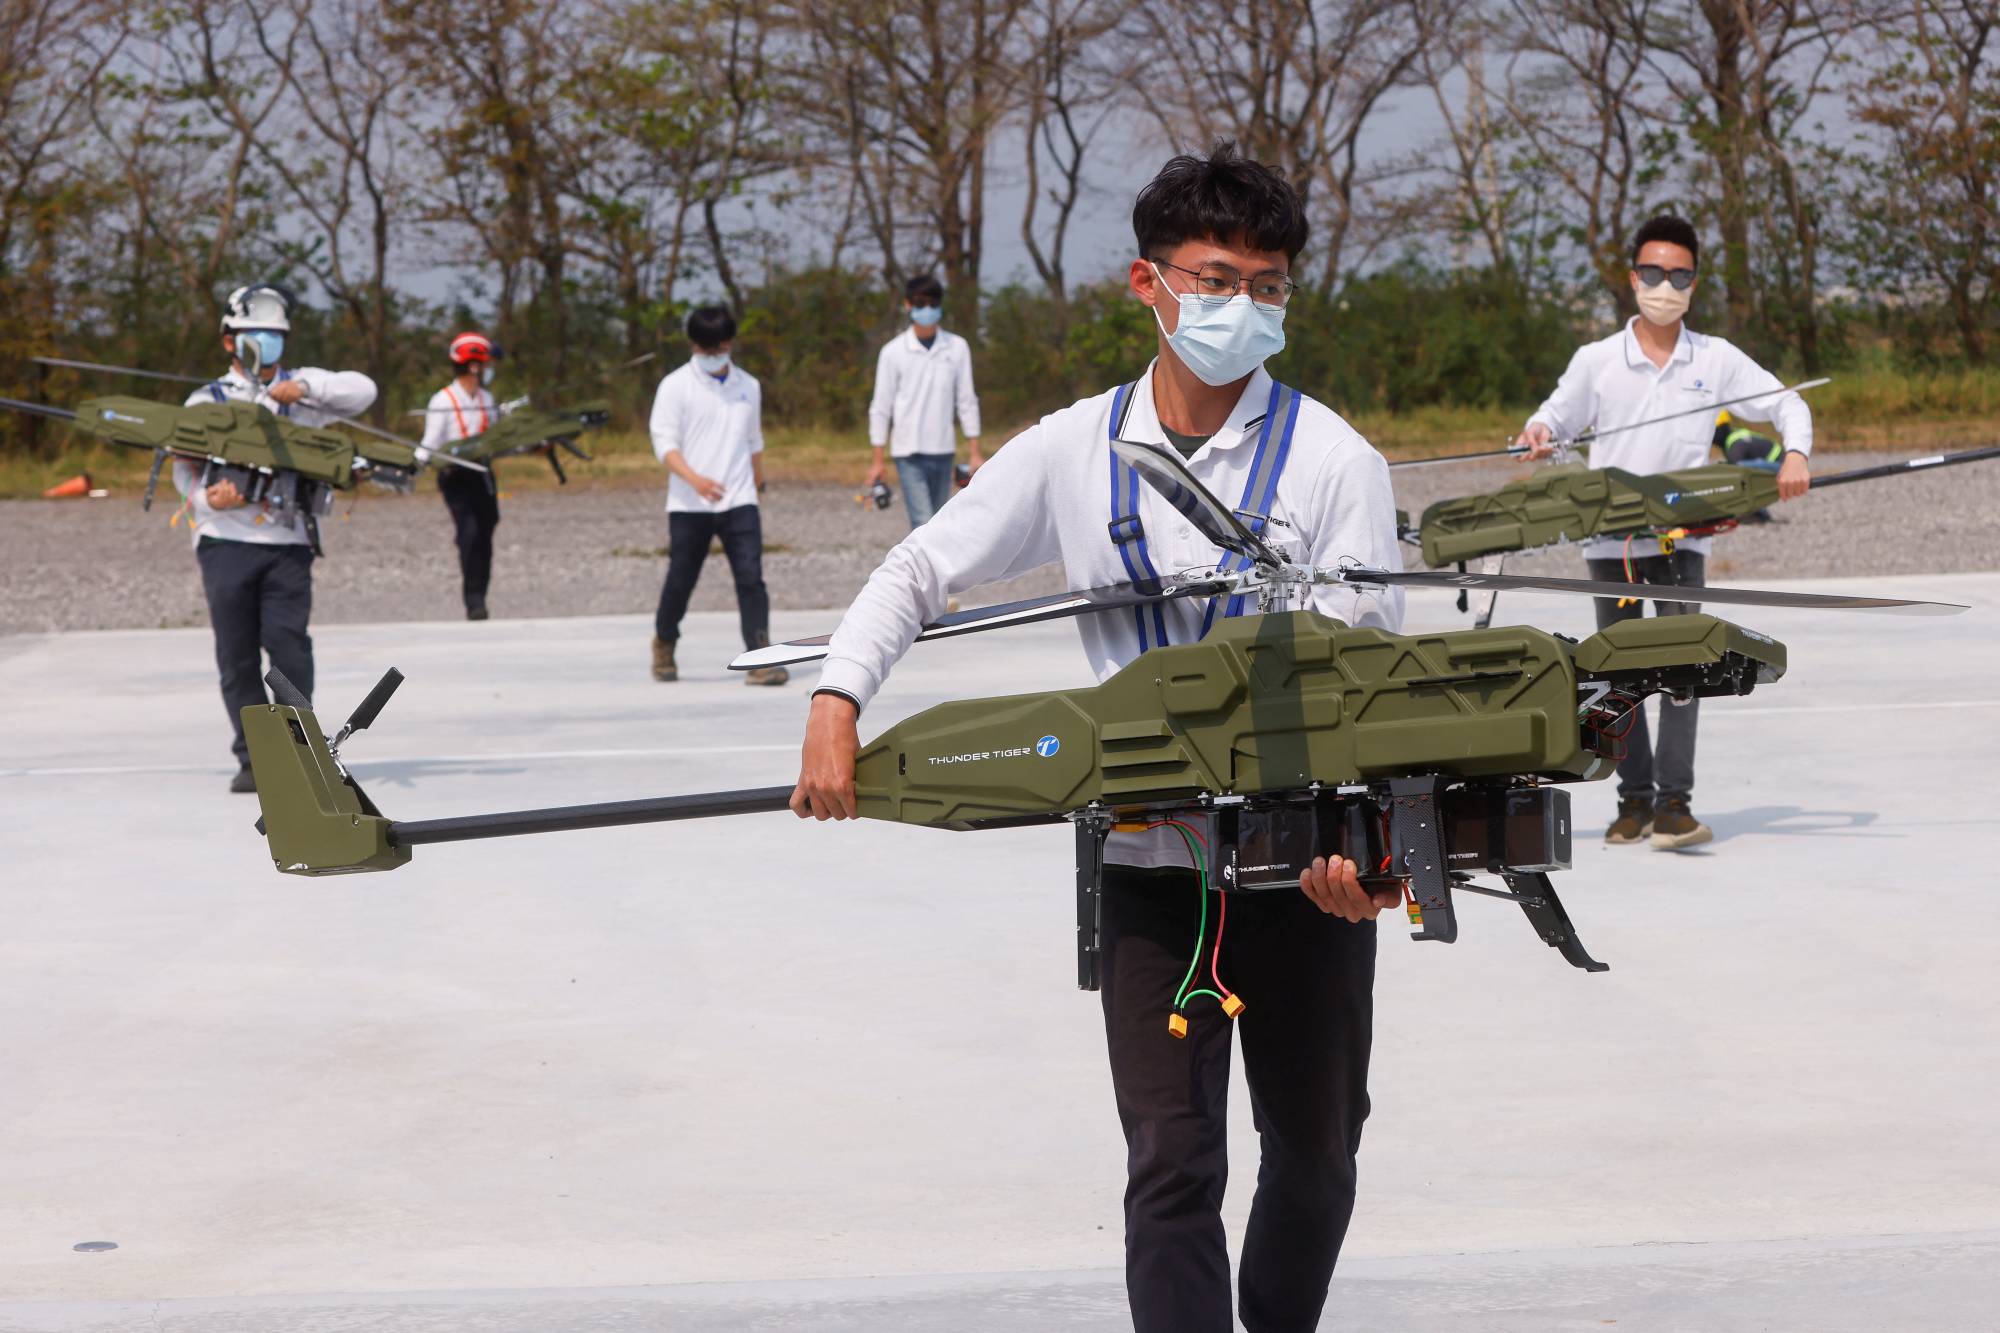 Staff members carry Thunder Tiger Group's unmanned aerial vehicles during a demonstration at a government-led Asia UAV AI Innovation Application R&D Center in Chiayi, Taiwan, on March 30. | REUTERS